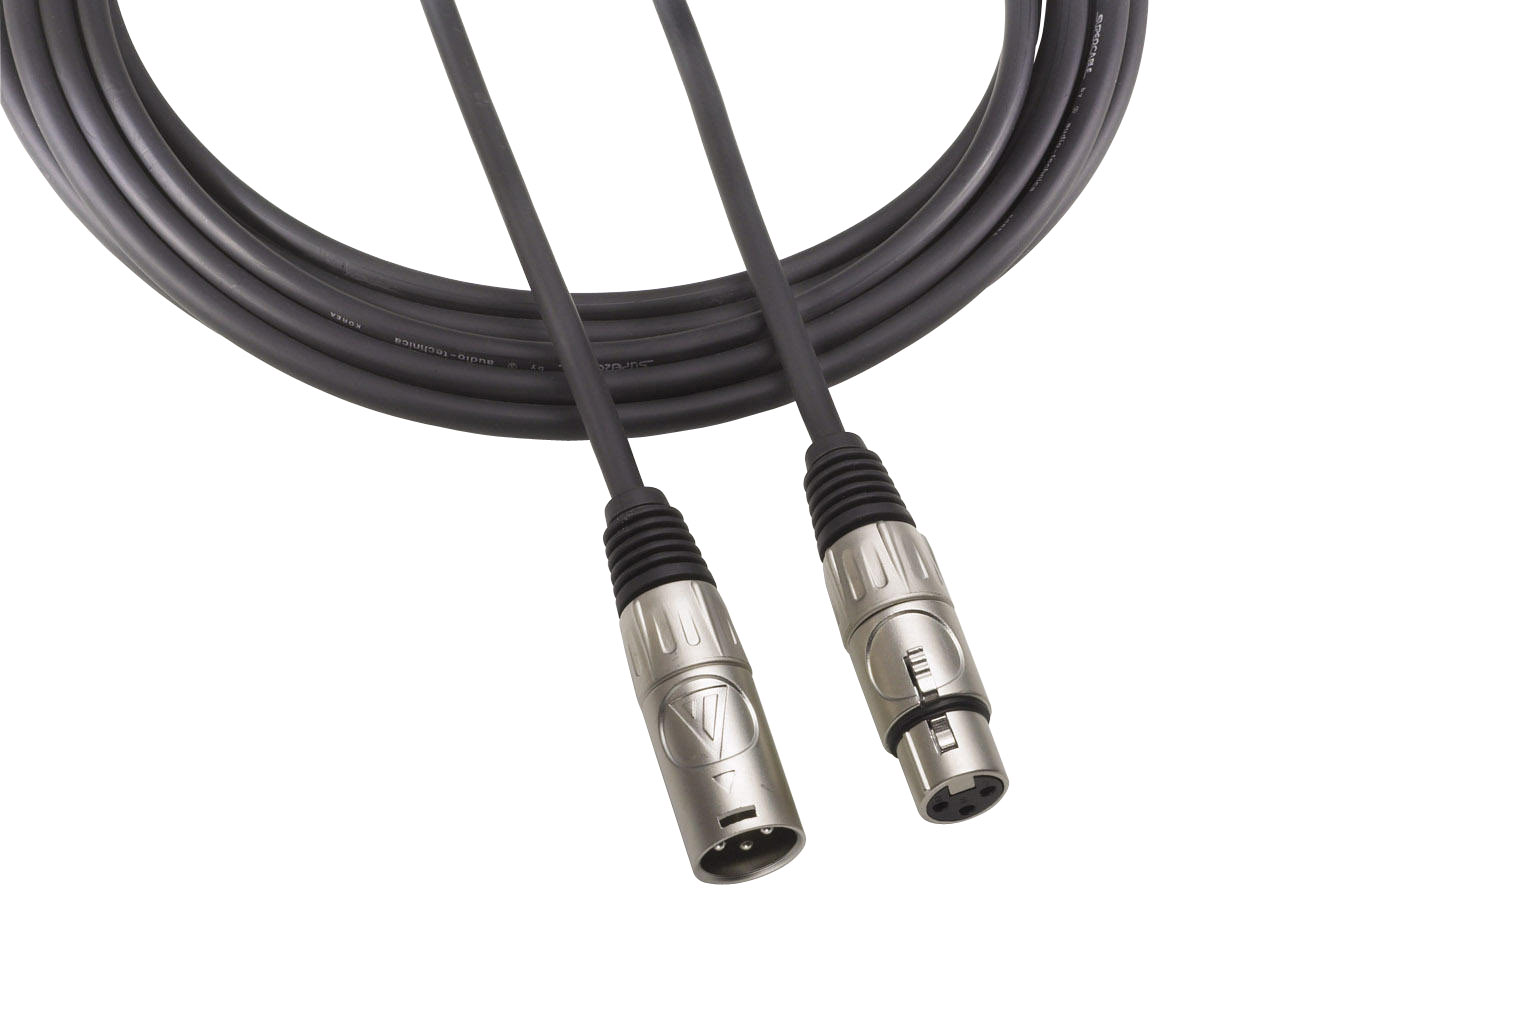 Audio-Technica Audio-Technica AT8313 Value XLR Microphone Cable (50 Foot)